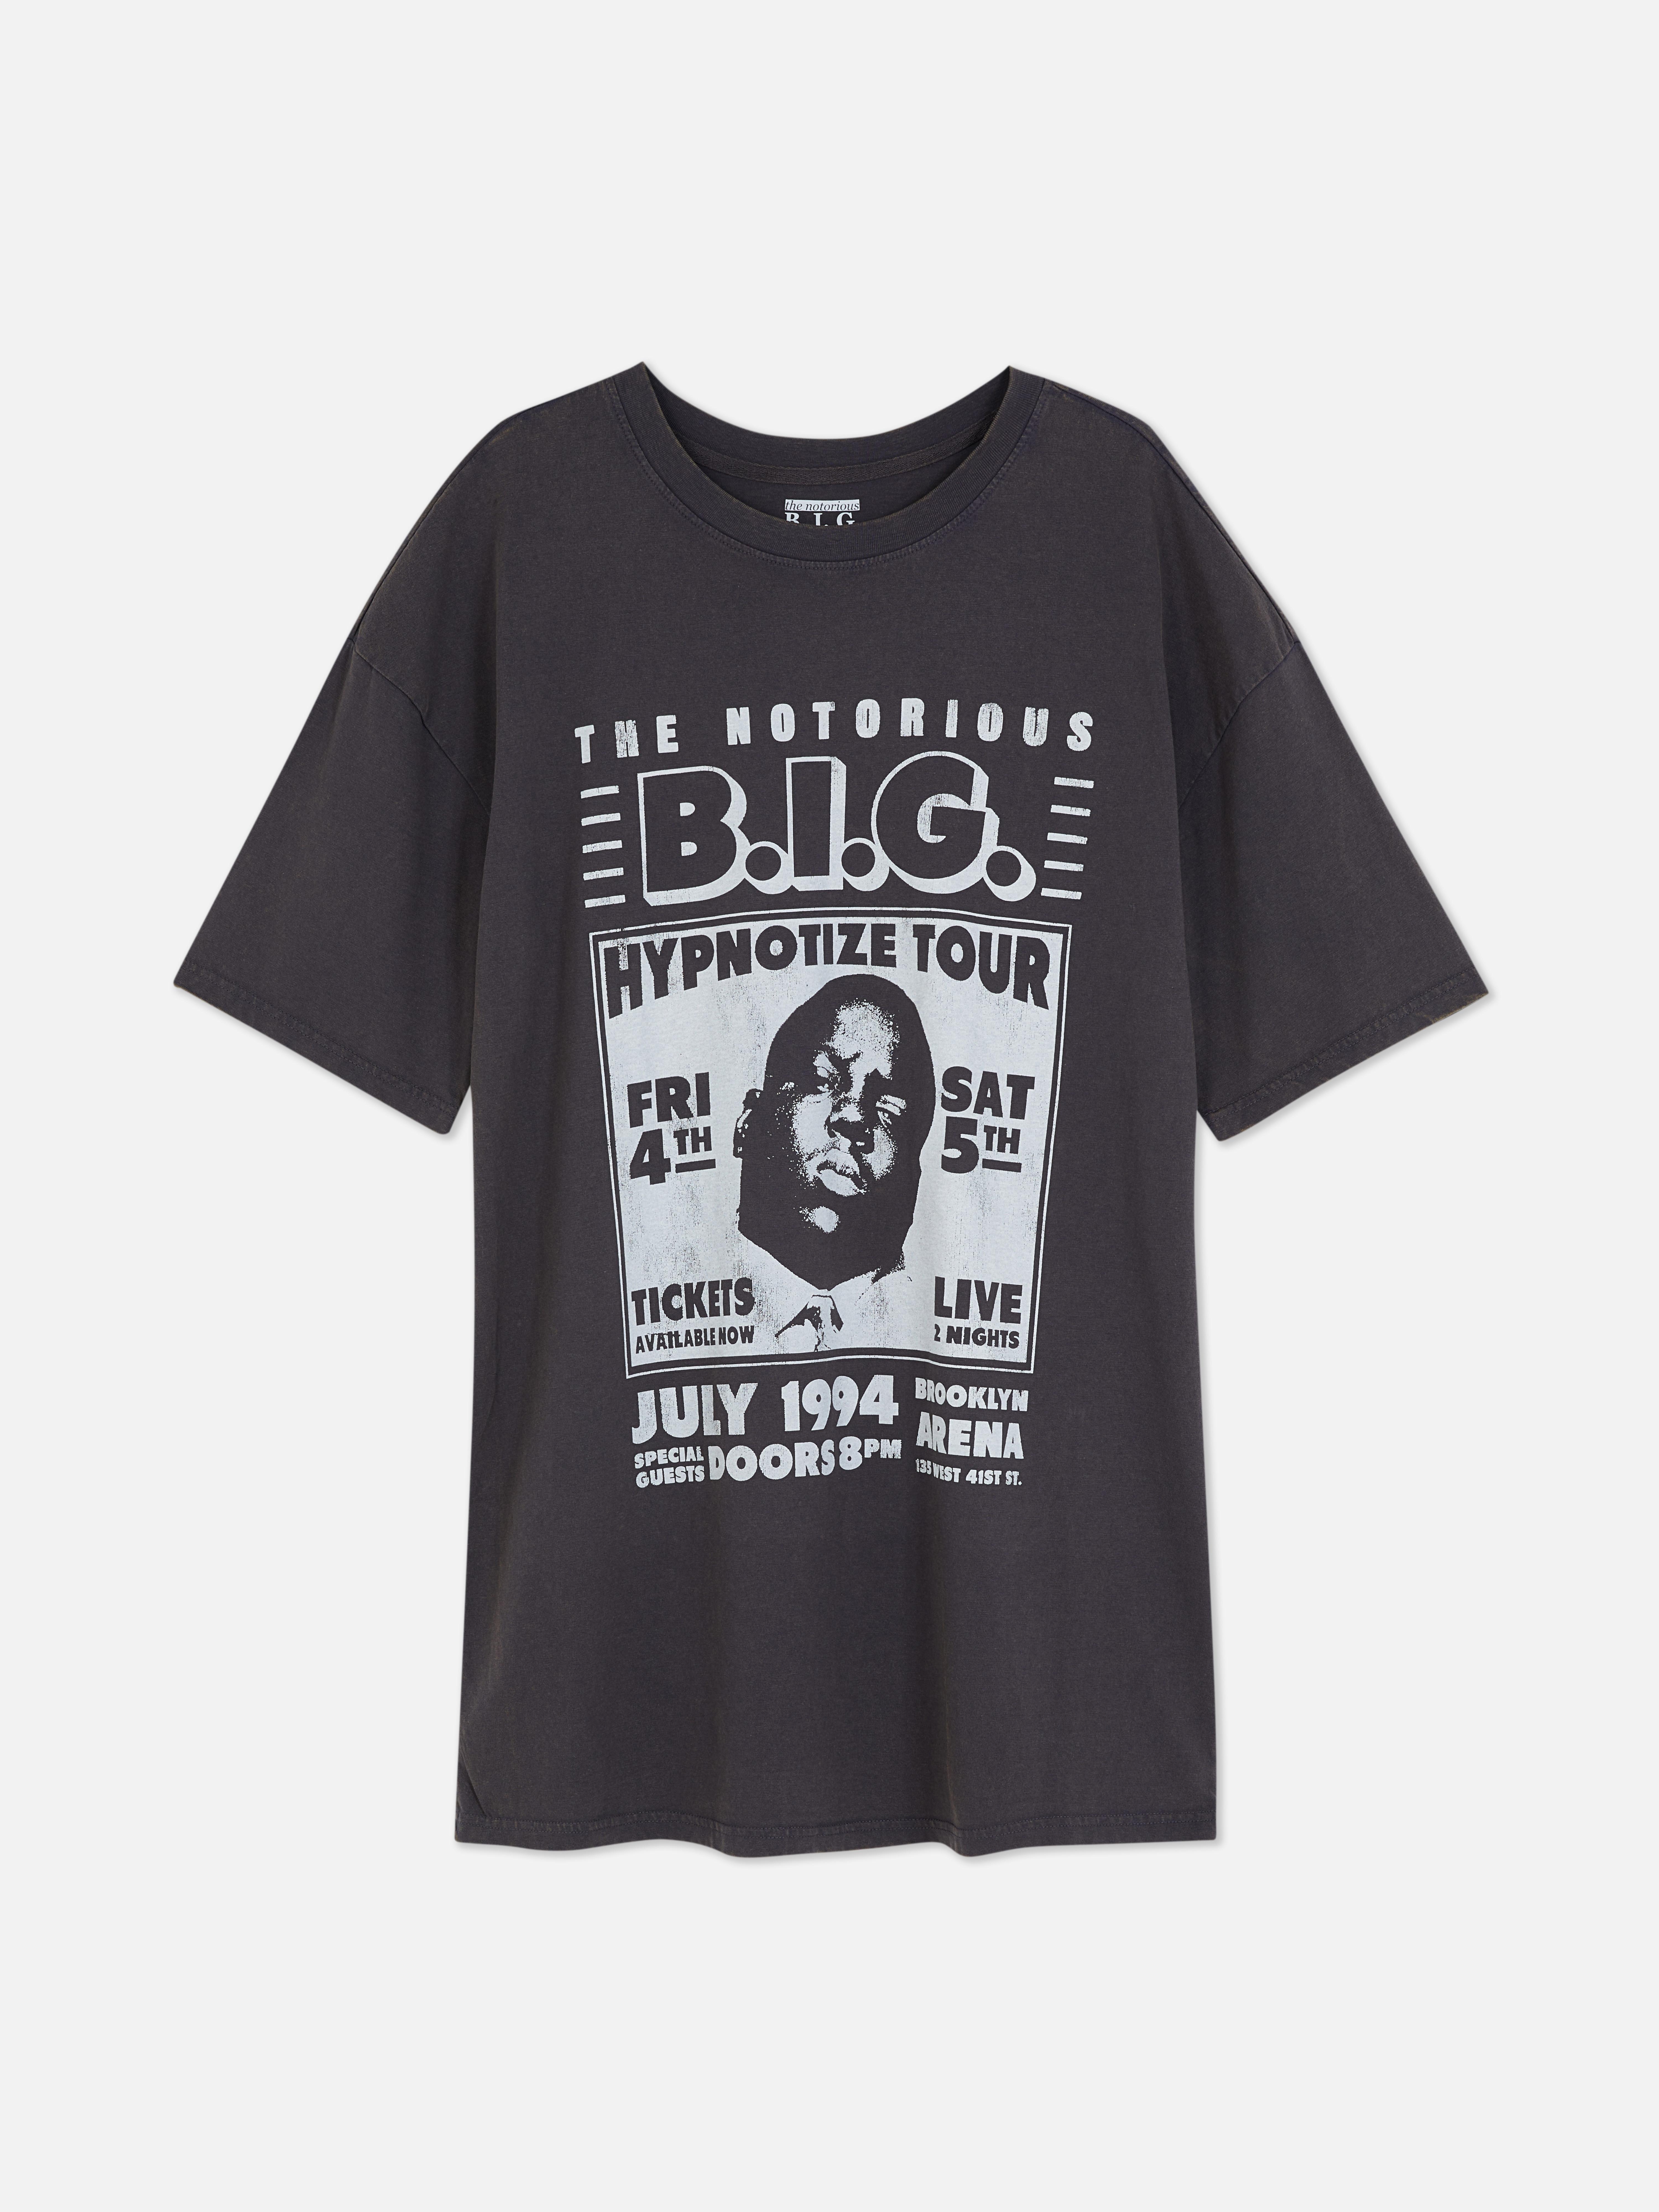 „The Notorious B.I.G“ T-Shirt im Oversized-Look